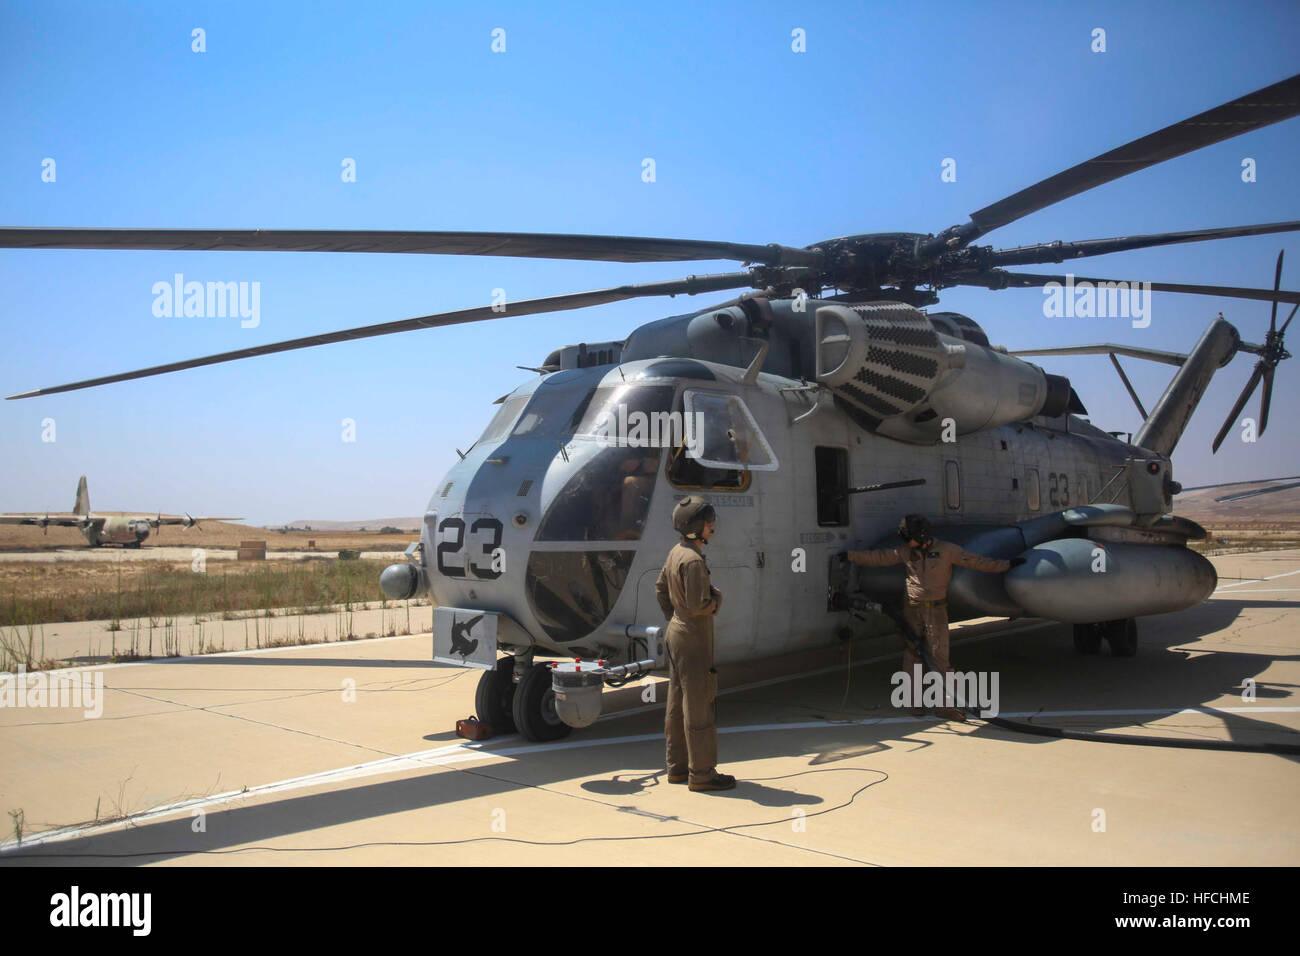 160720-M-KK554-215 ISRAEL DEFENSE FORCES NATIONAL TRAINING CENTER, Israel (July 20, 2016) U.S. Marines with Marine Medium Tiltrotor Squadron 264 (Reinforced), 22nd Marine Expeditionary Unit (MEU), refuel a  CH-53E Super Stallion helicopter before a  flight July 20, 2016, during Noble Shirley 16, a bilateral training exercise with the Israel Defense Forces. 22nd MEU, deployed with the Wasp Amphibious Ready Group, is conducting naval operations in the U.S. 6th fleet area of operations in support of U.S. national security interests in Europe. (U.S. Marine Corps photo by Sgt. Ryan Young/Released)  Stock Photo